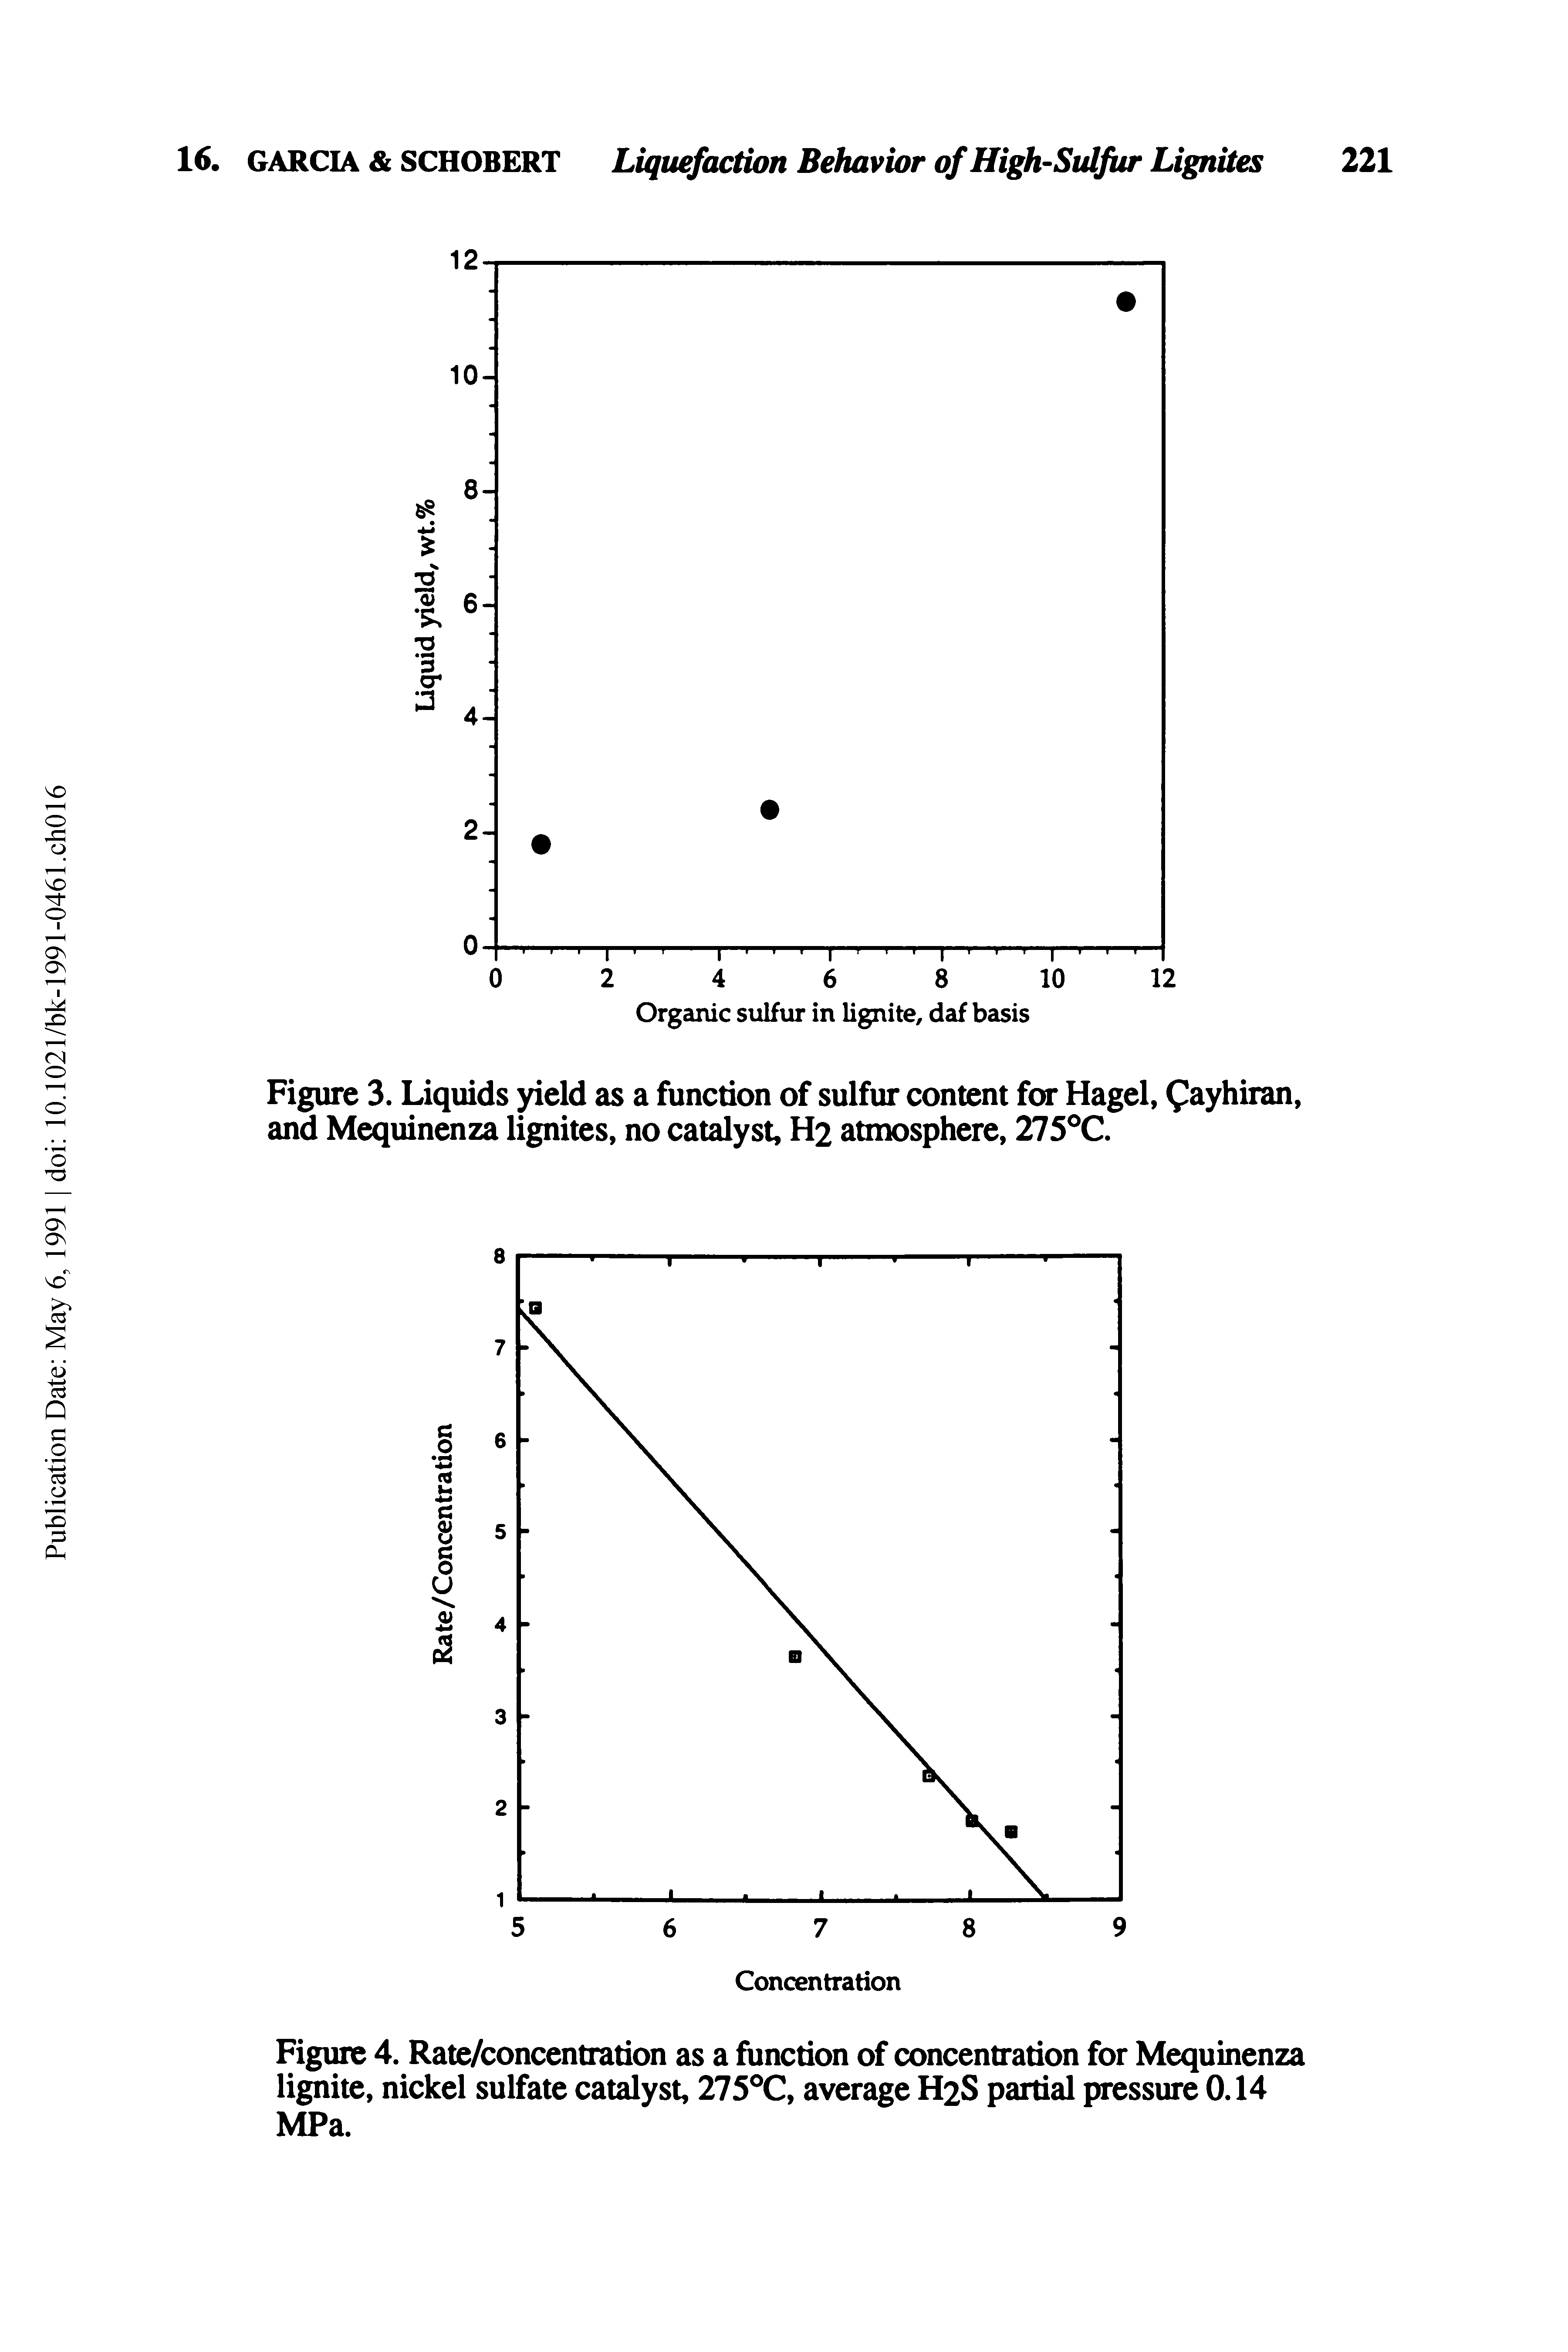 Figure 4. Rate/concentration as a function of concentration for Mequinenza lignite, nickel sulfate catalyst, 275 C, average H2S partial pressure 0.14 MPa.